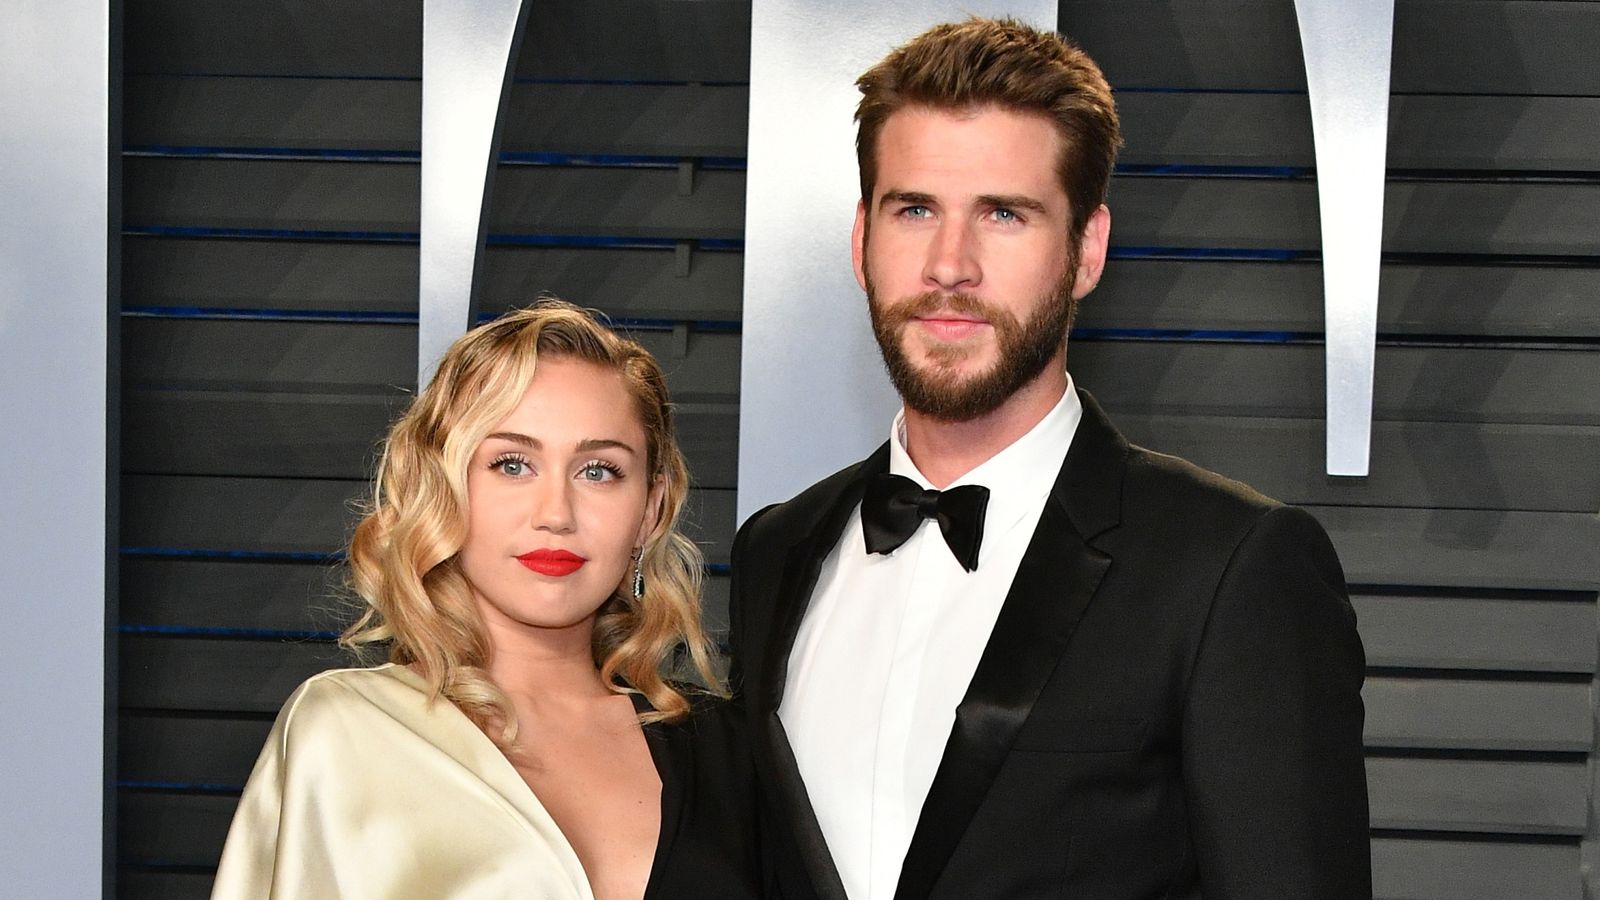 Miley Cyrus and Liam Hemsworth had been together on-and-off for around a de...